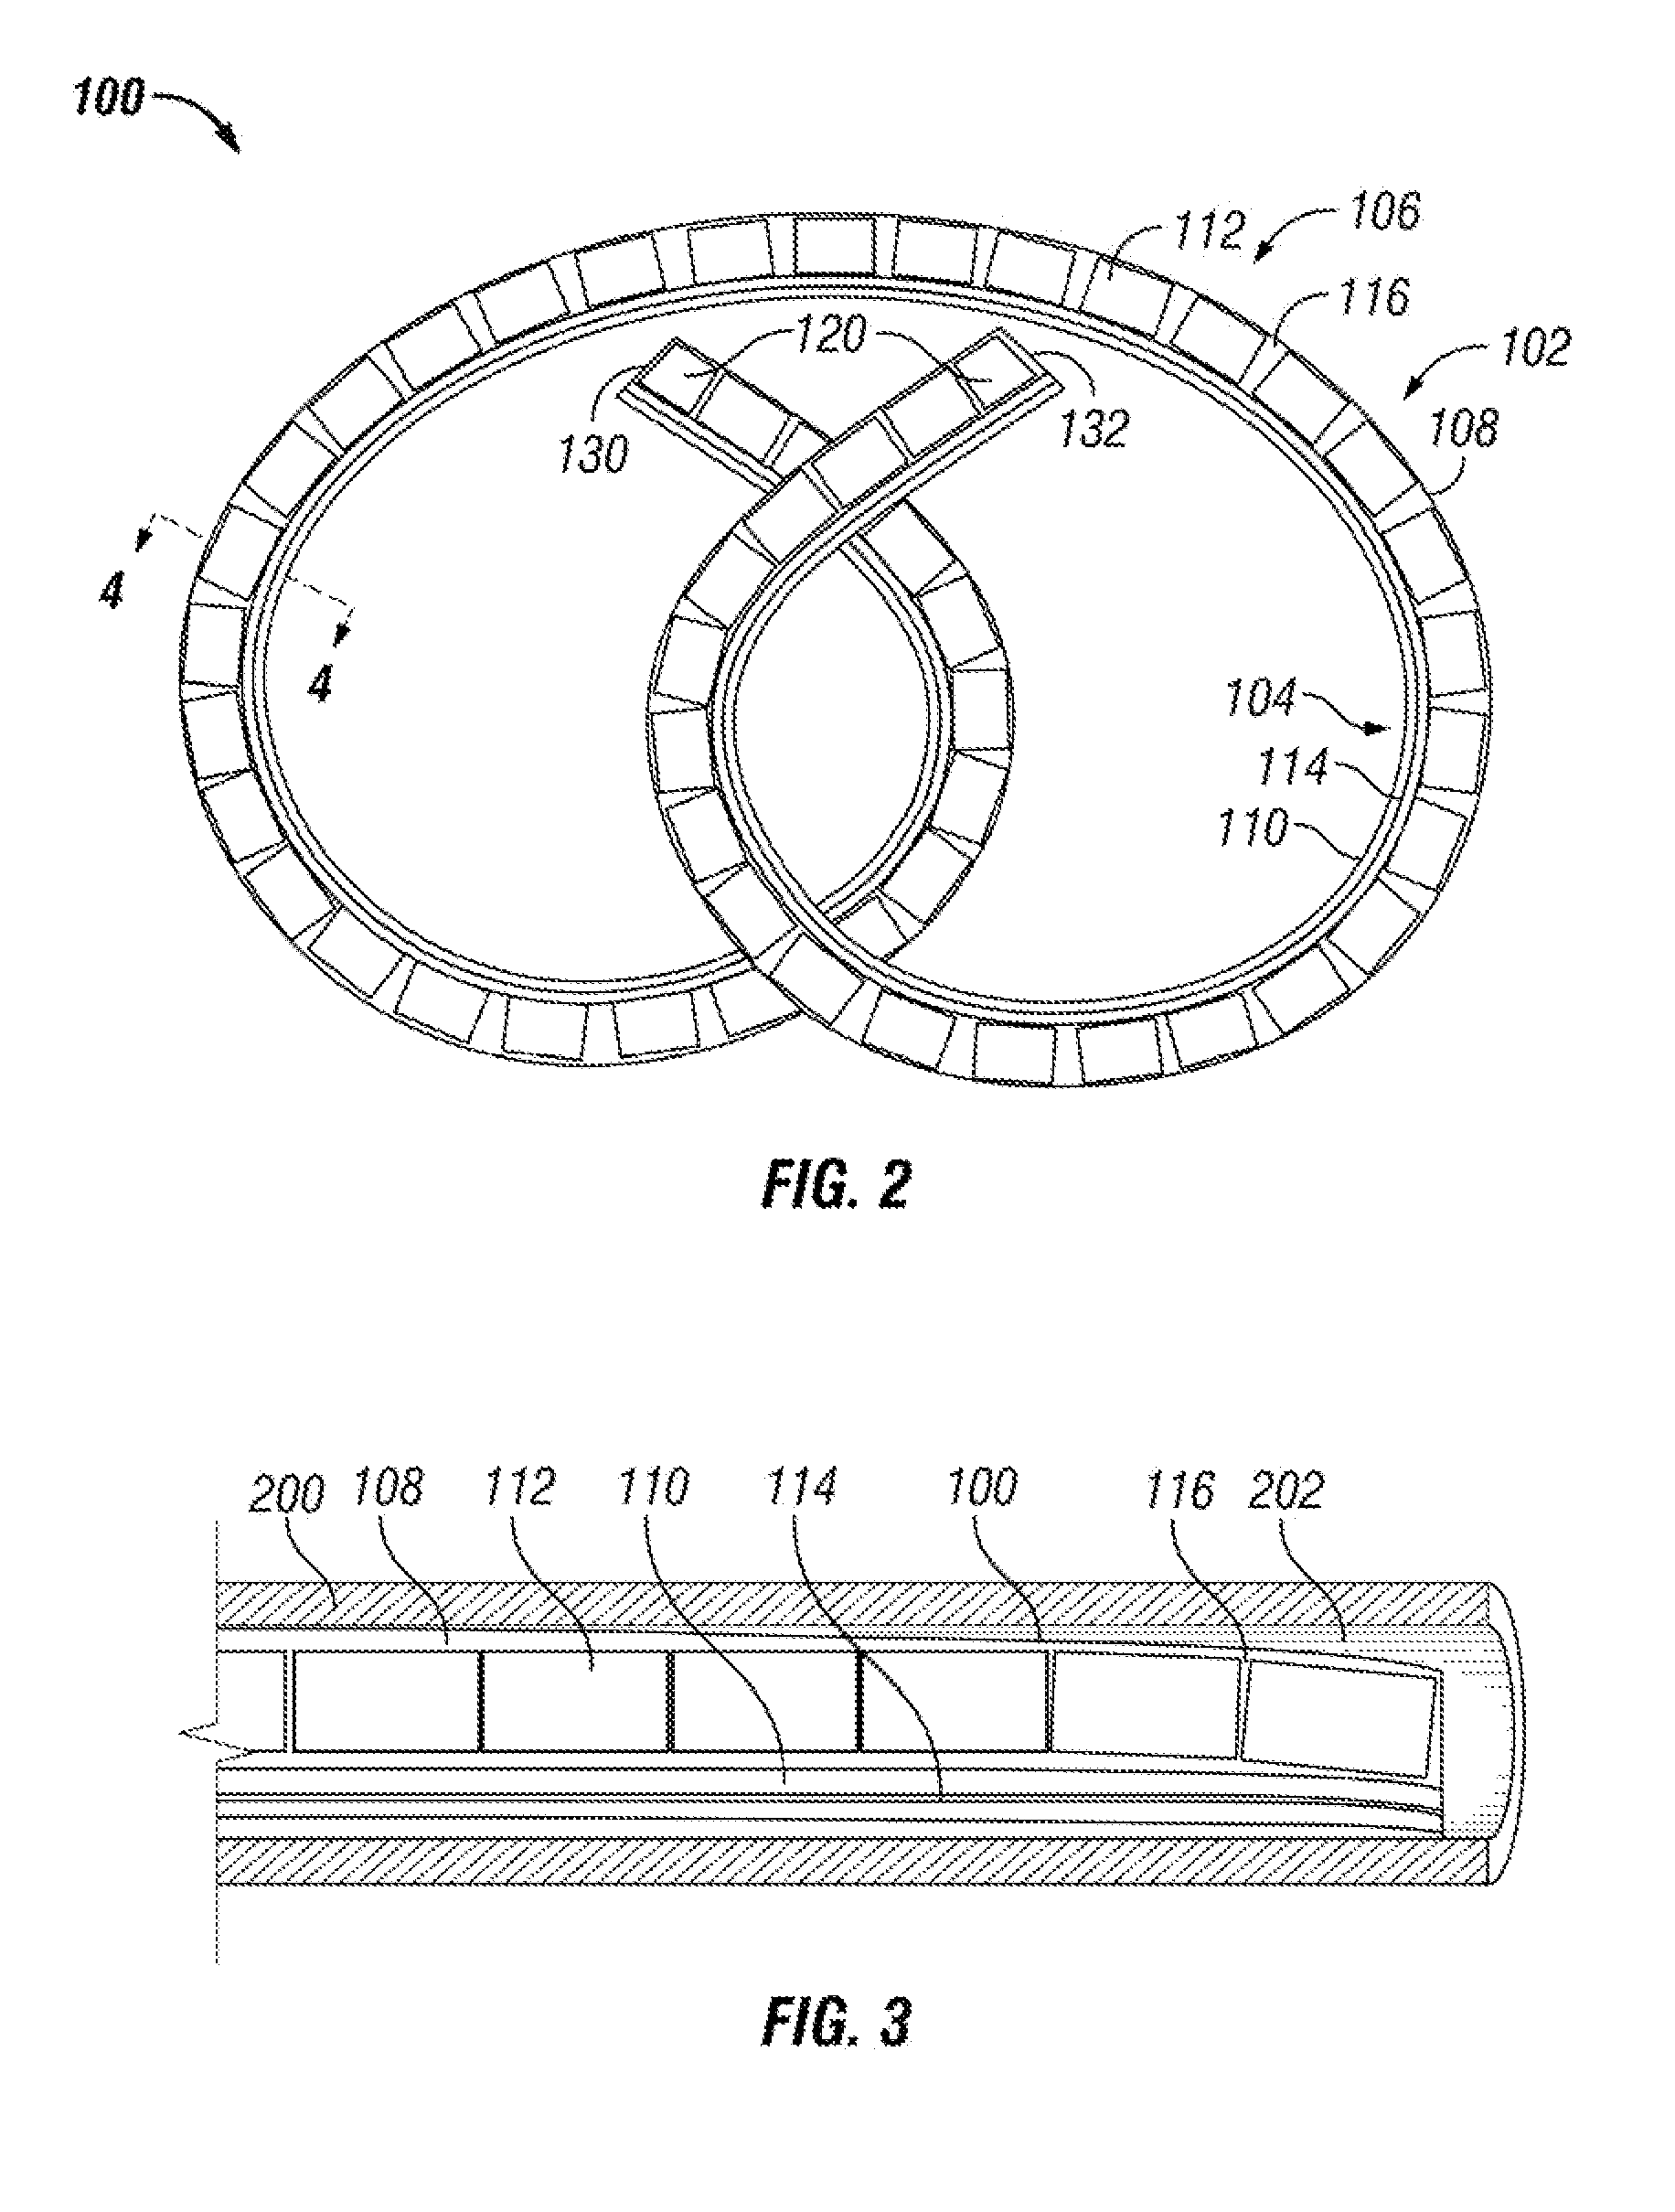 Drug delivery devices and methods for drug delivery